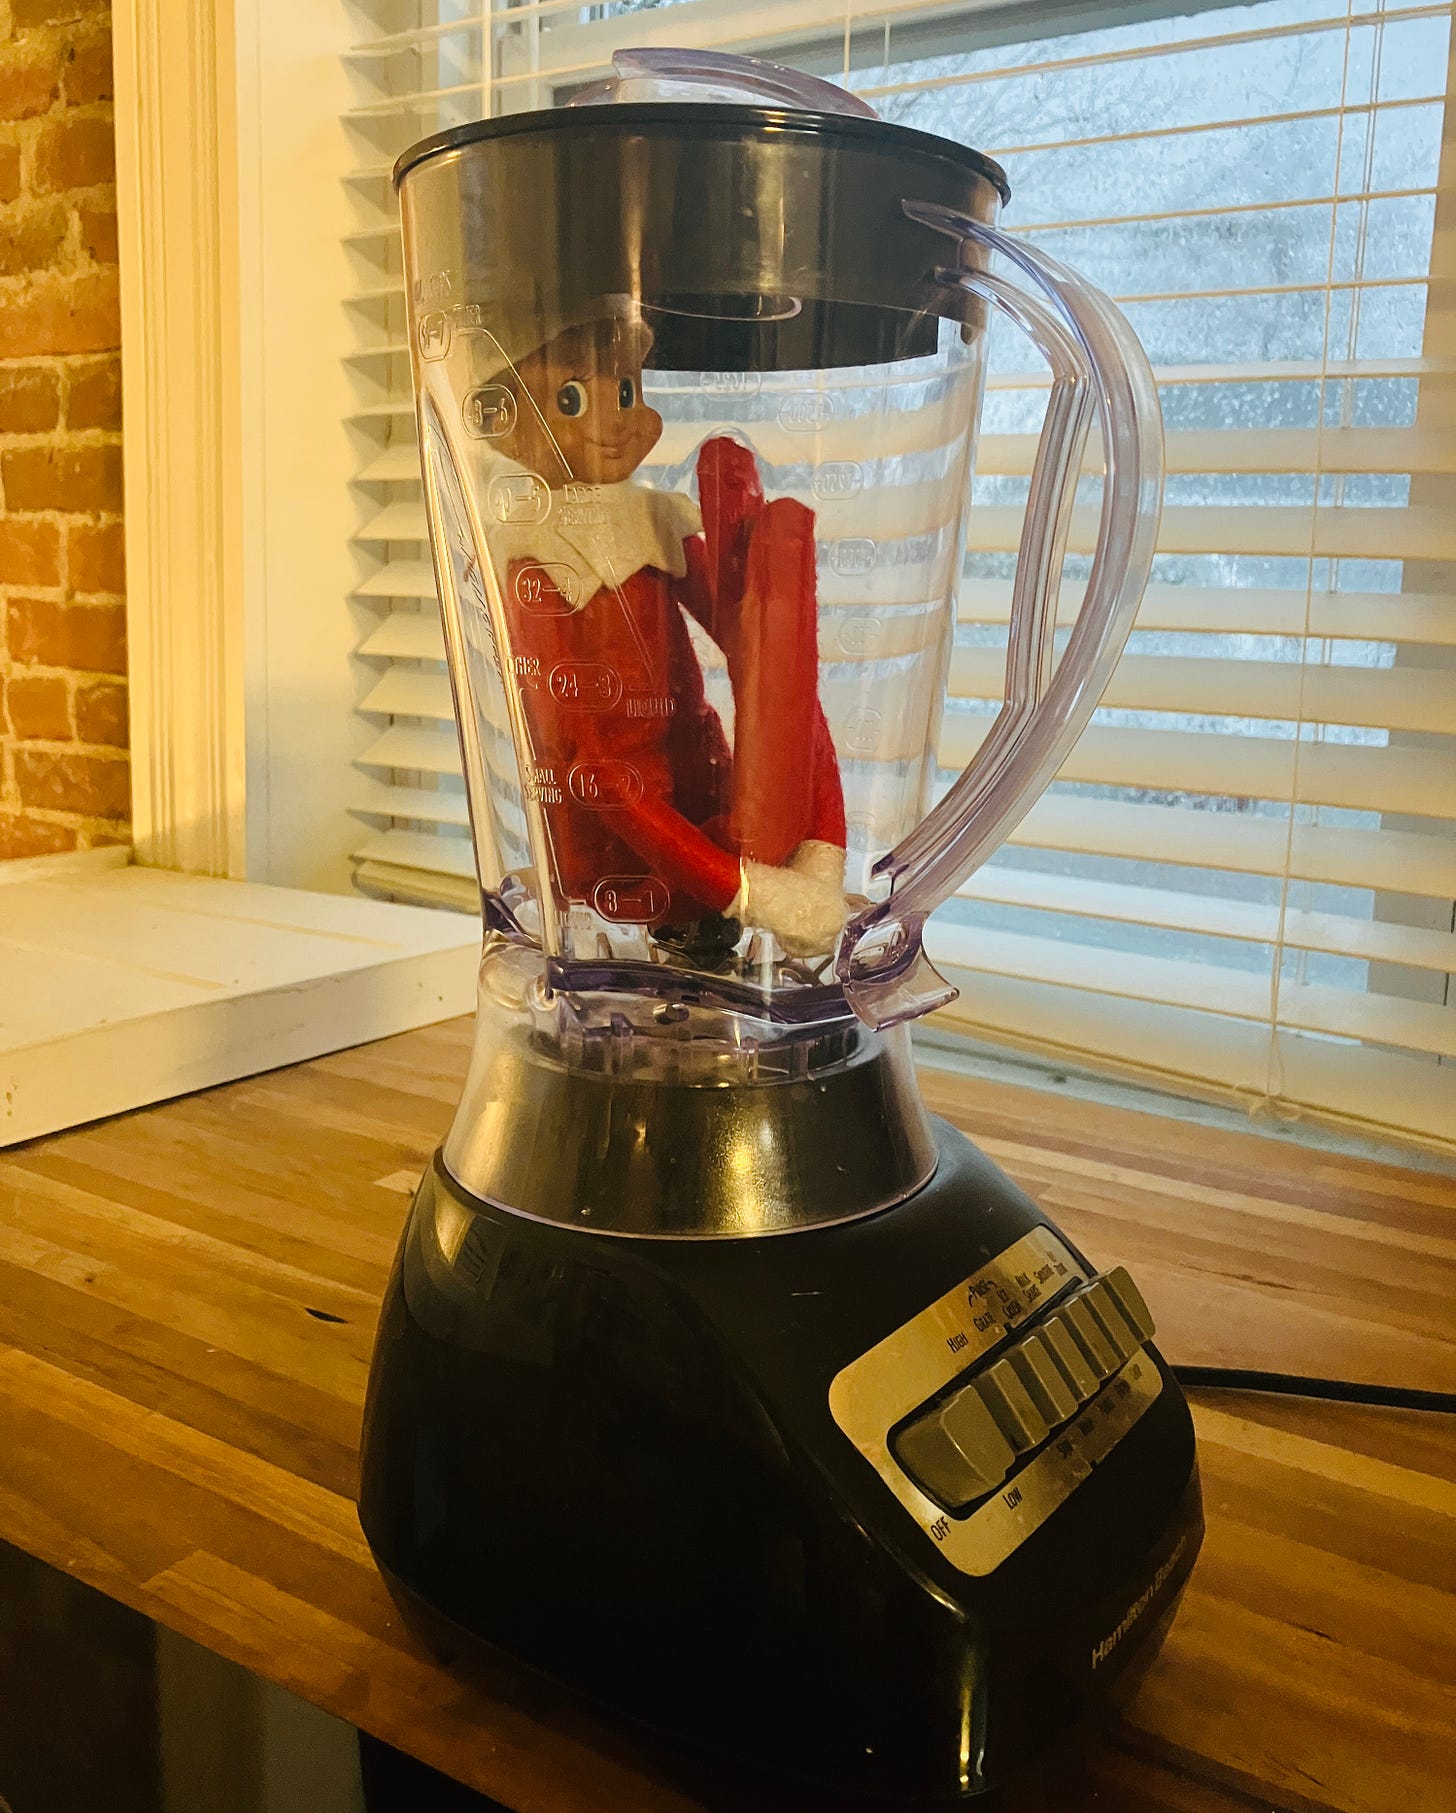 A photo of an Elf On The Shelf in a blender